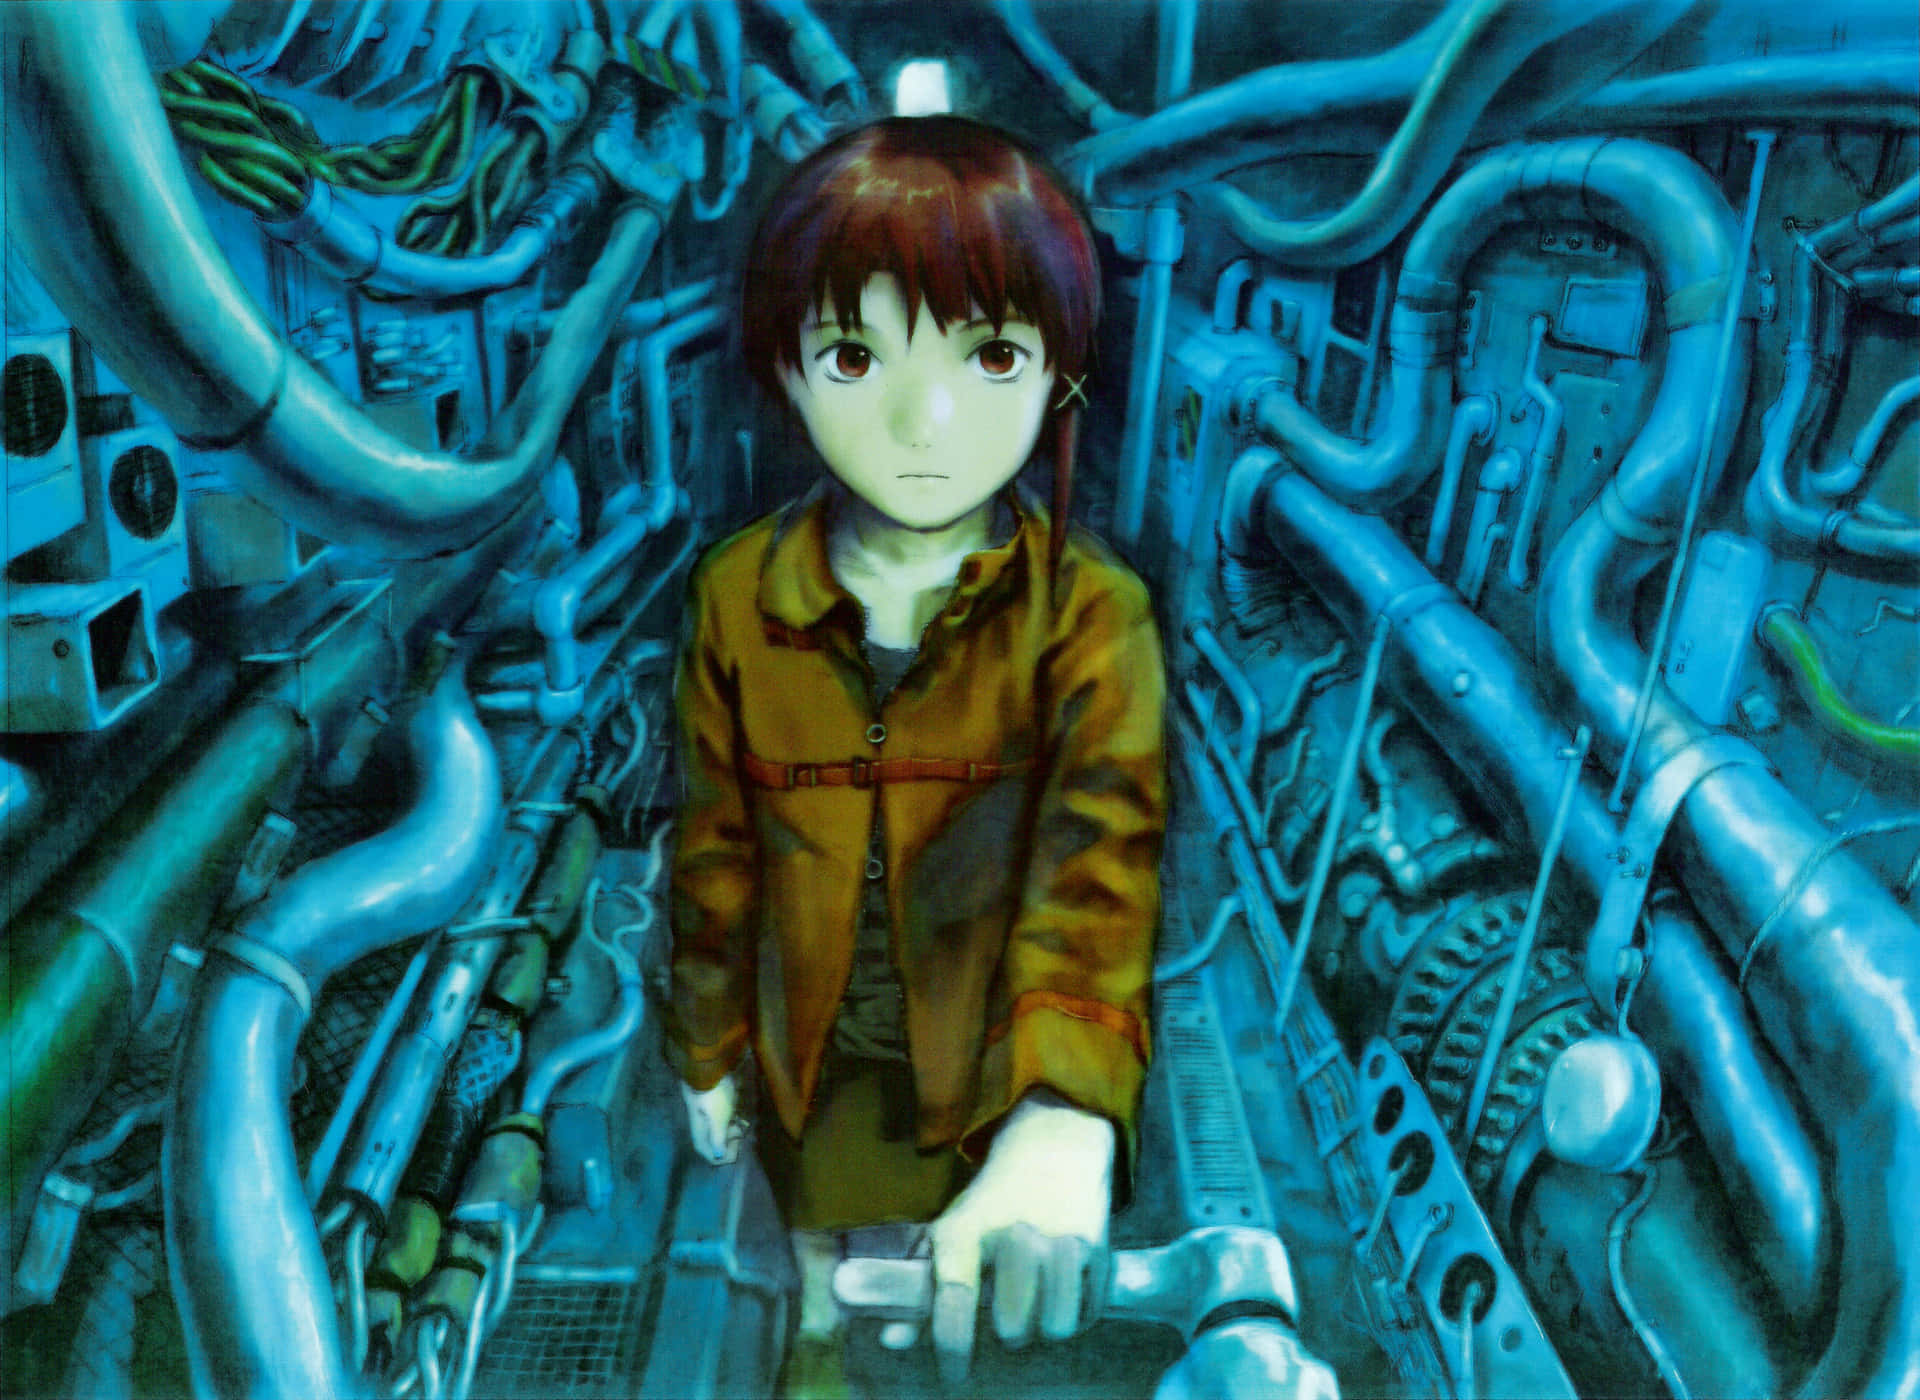 Serial Experiments Lain continues to captivate the minds of anime fans around the world. Wallpaper